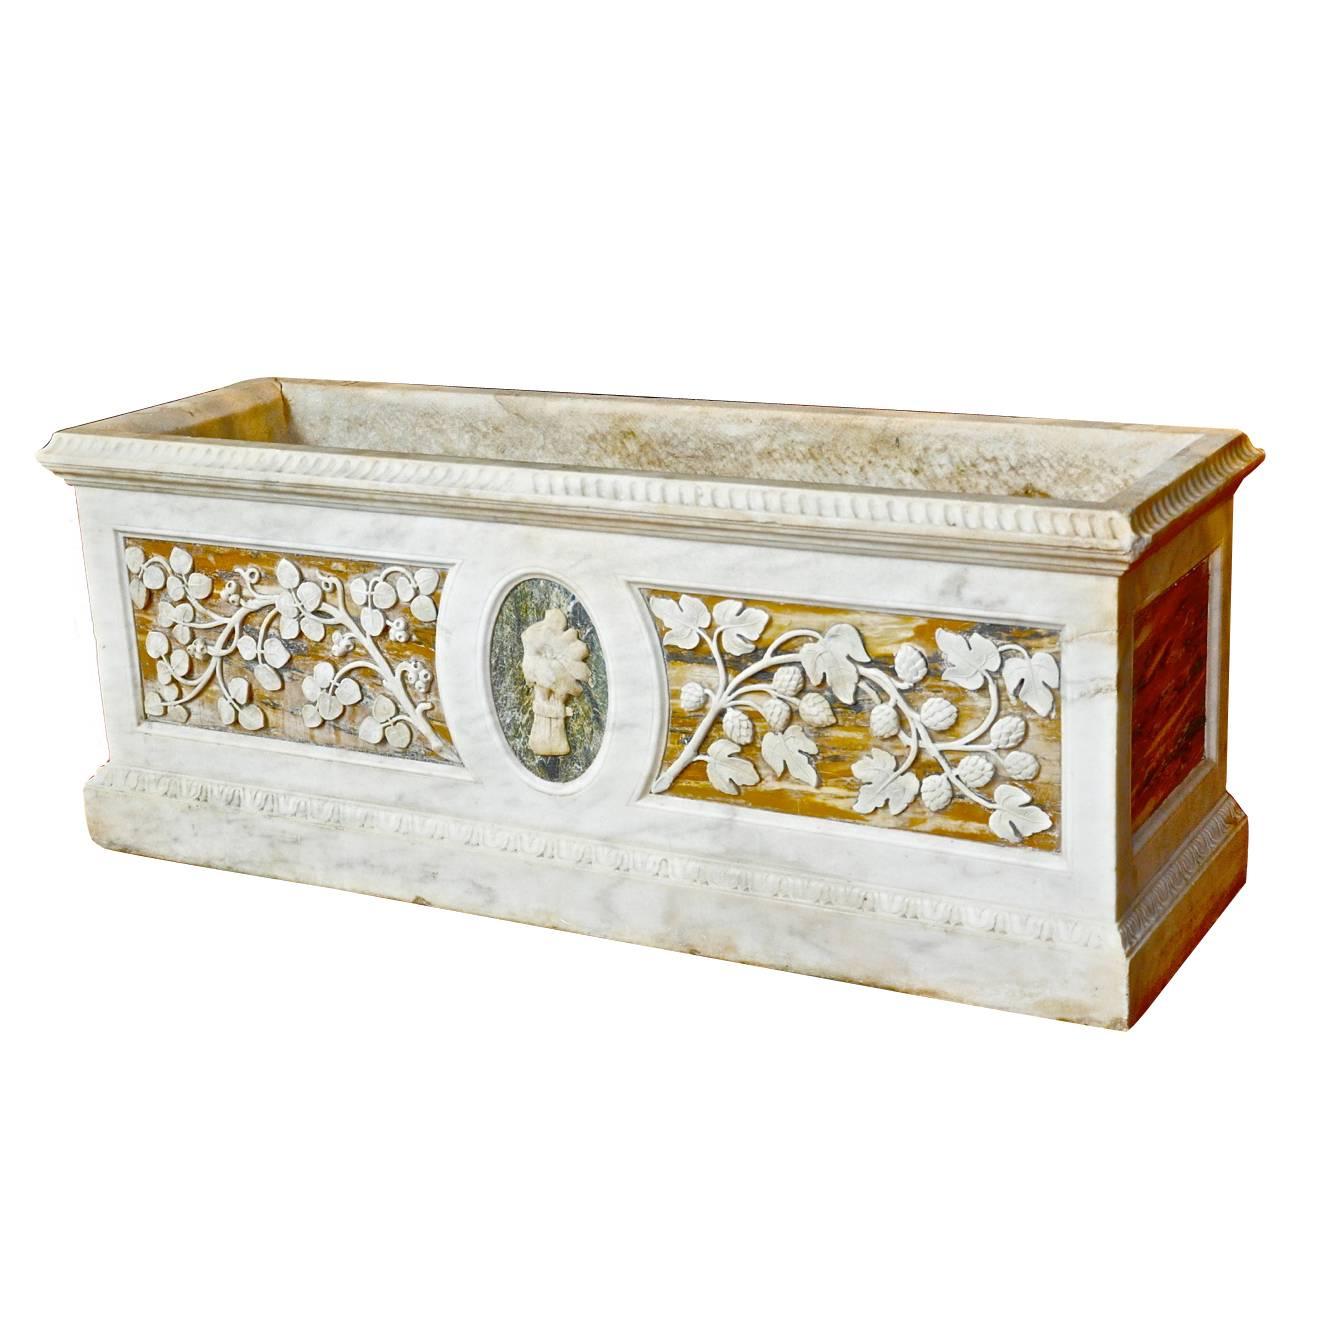 Carved Roman Grand Tour Marble Planter or Trough